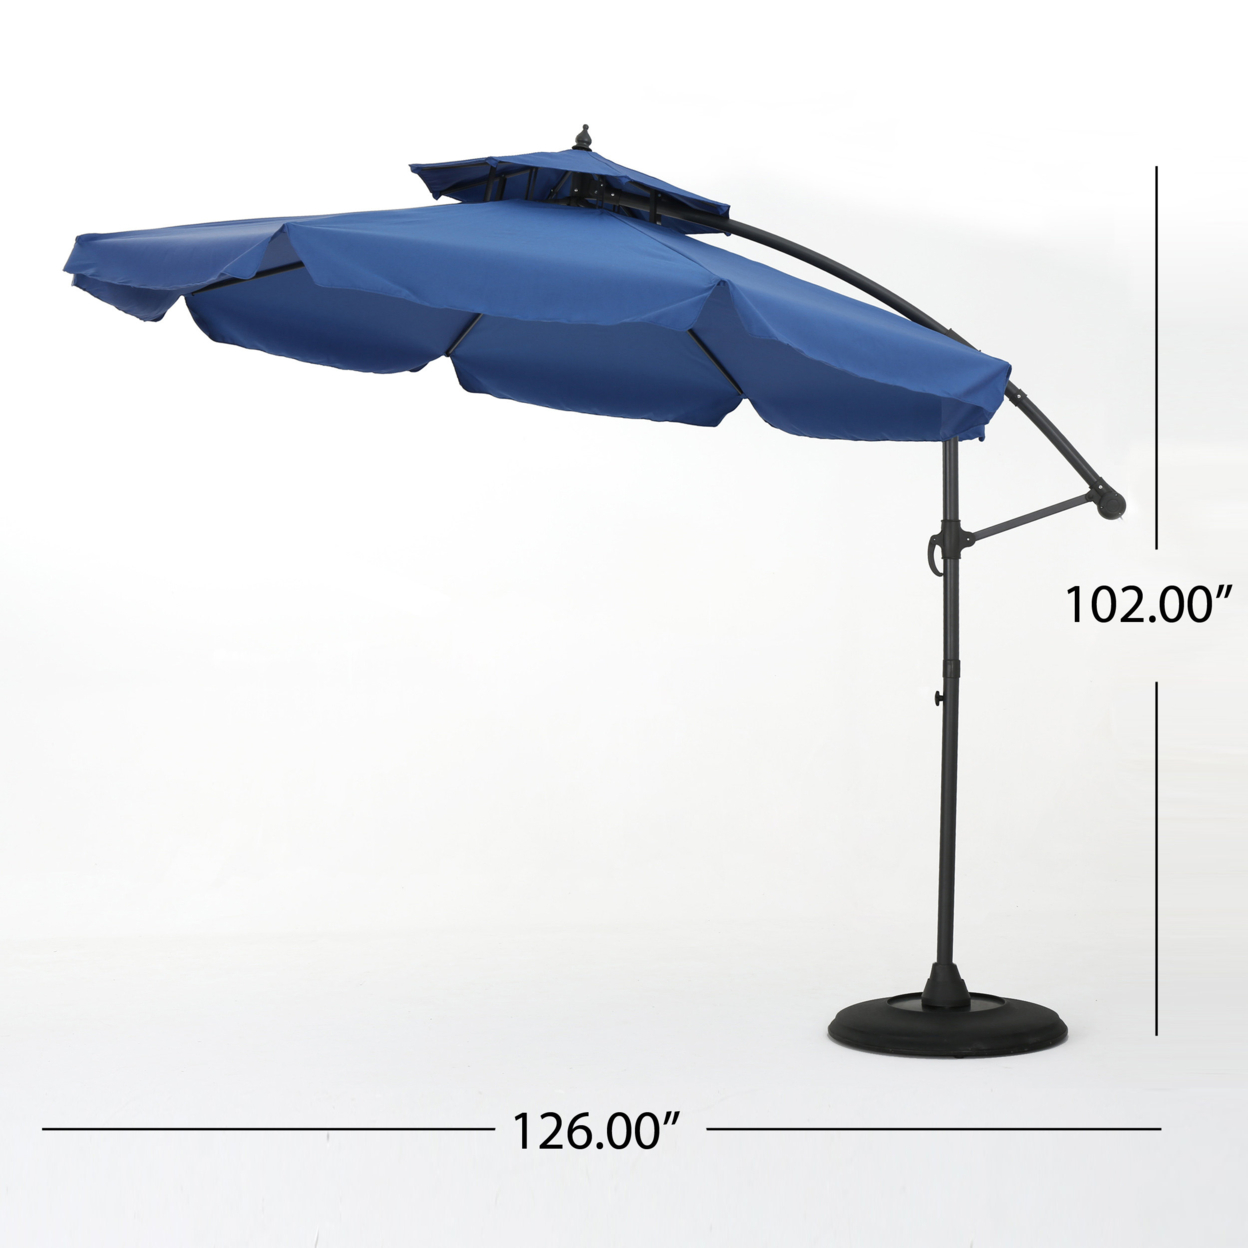 Balrey Outdoor Navy Blue Water Resistant Canopy Sunshade With Base